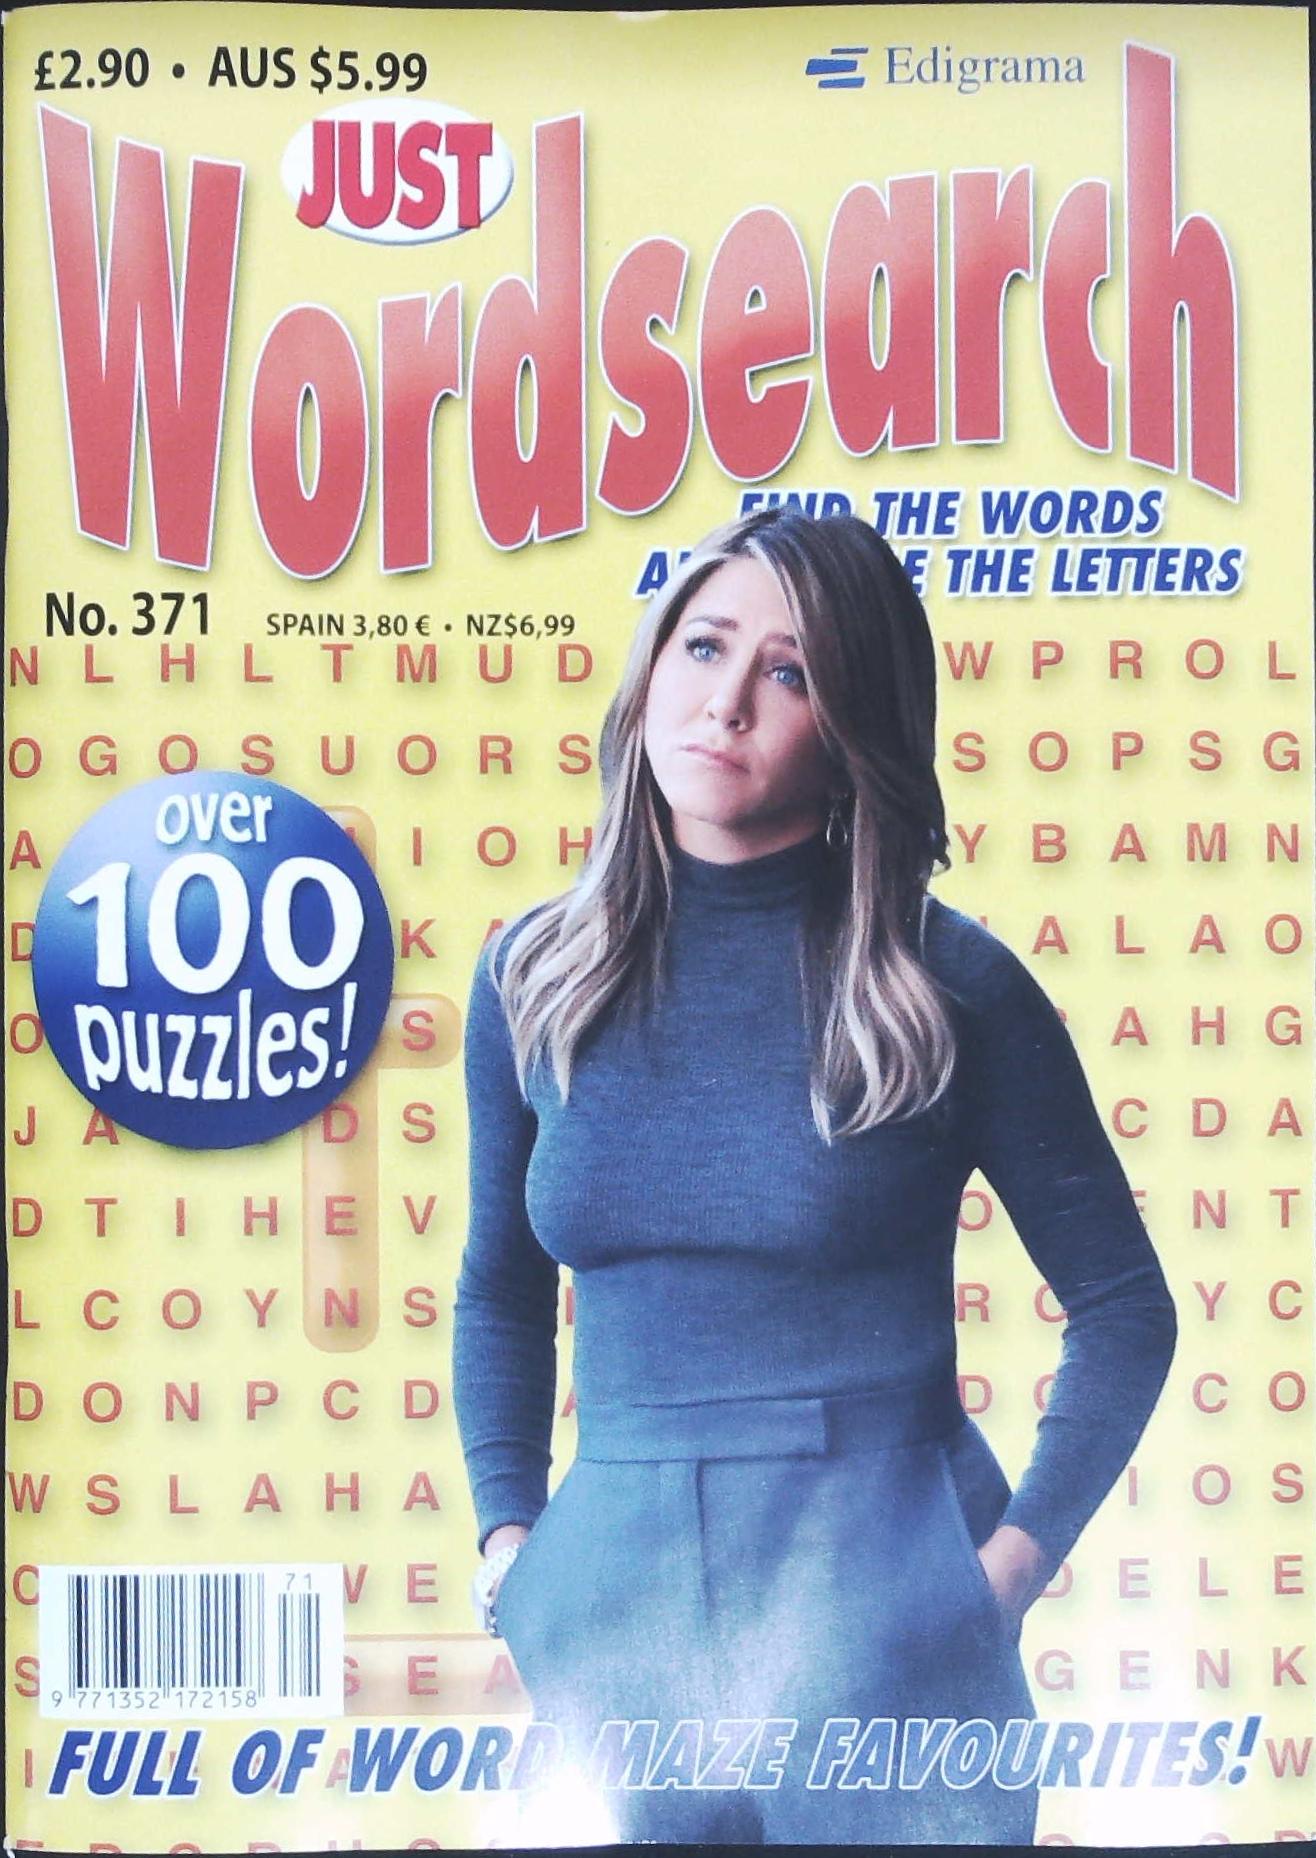 JUST WORDSEARCH